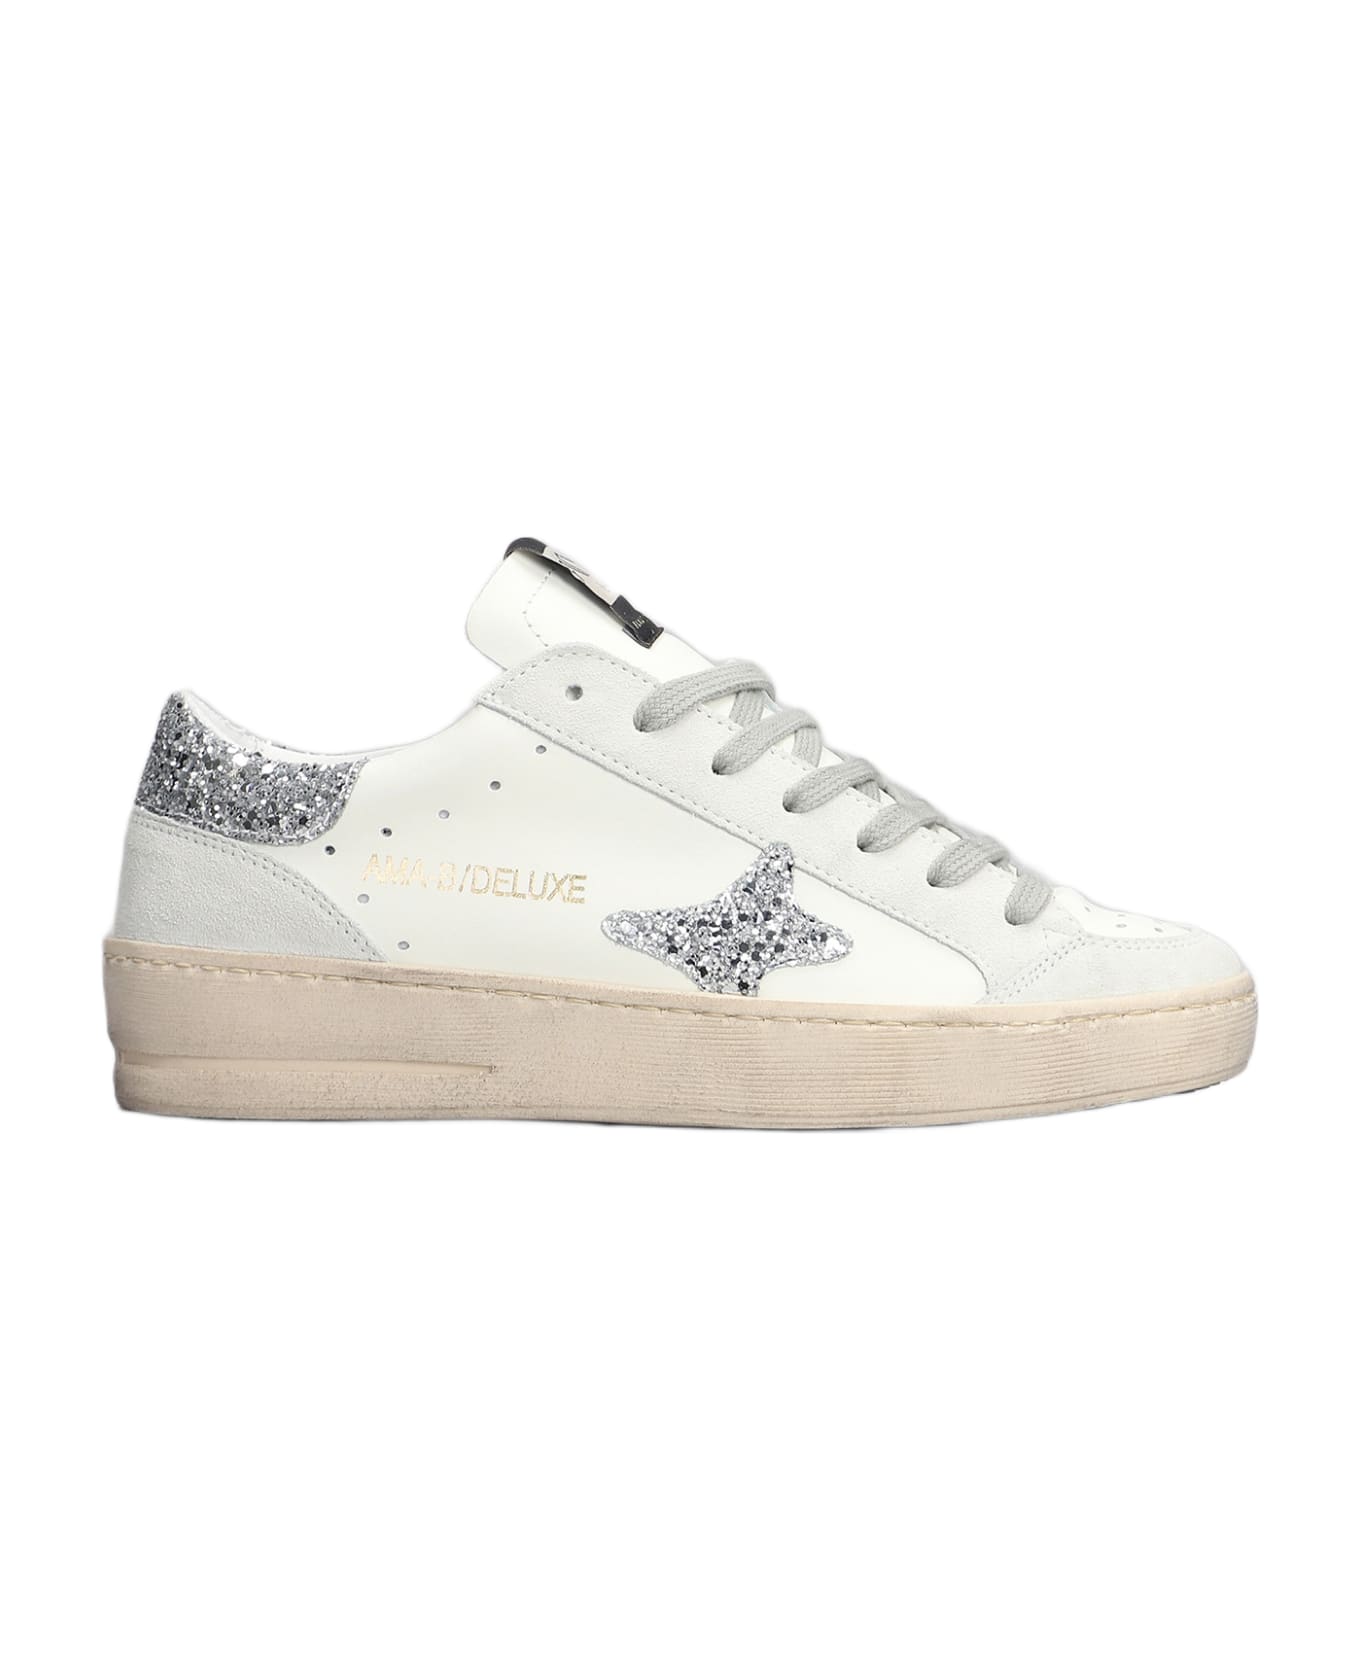 AMA-BRAND Sneakers In White Suede And Leather - white スニーカー